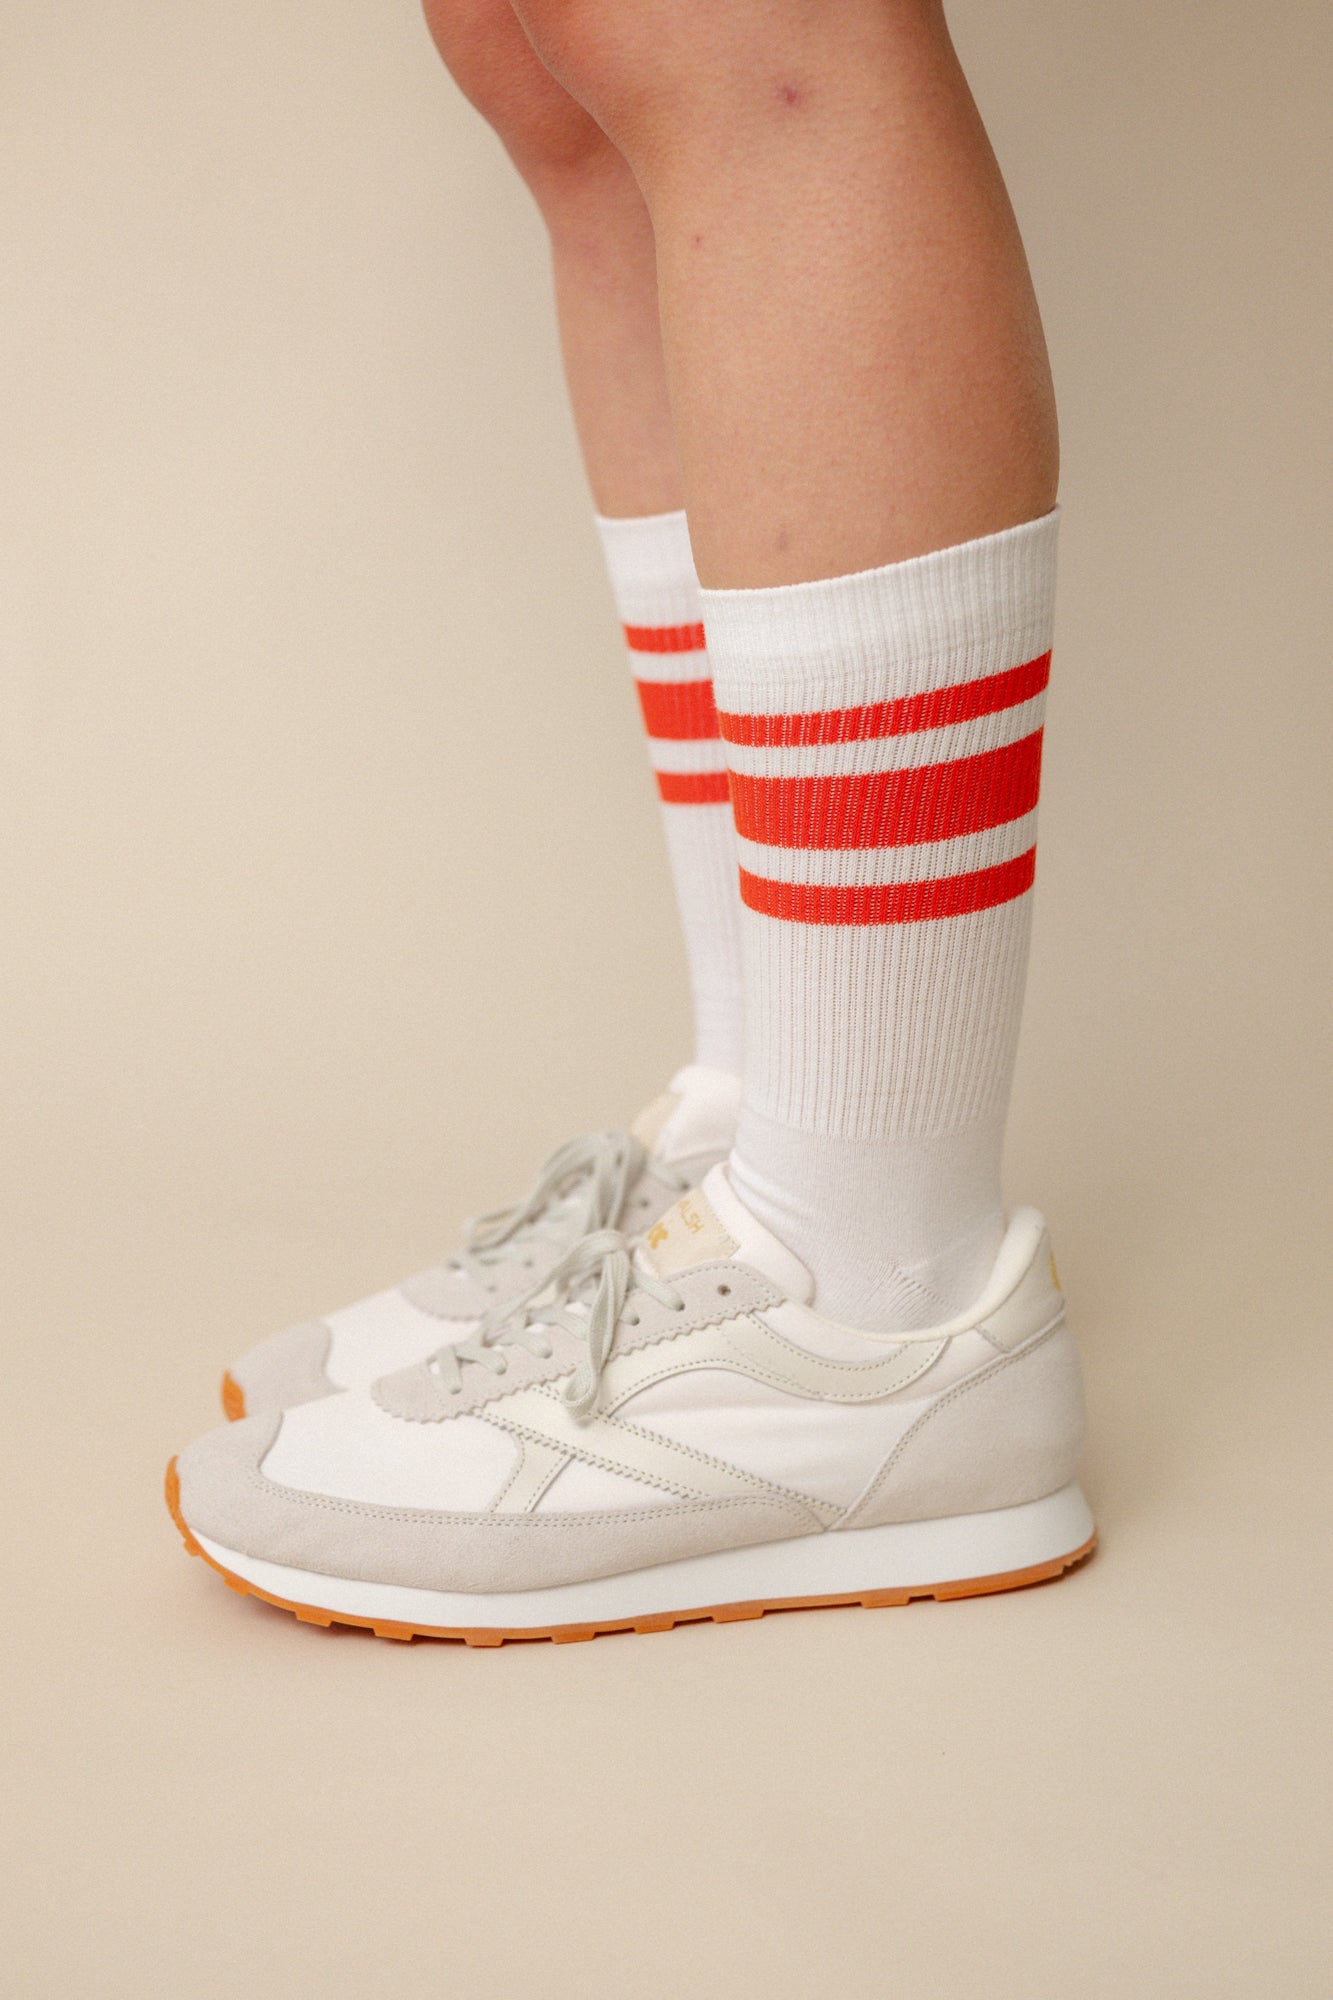 Model wearing calf sports sock in white with flame red stripe wearing Wlash X Community Clothing Beacon trainers